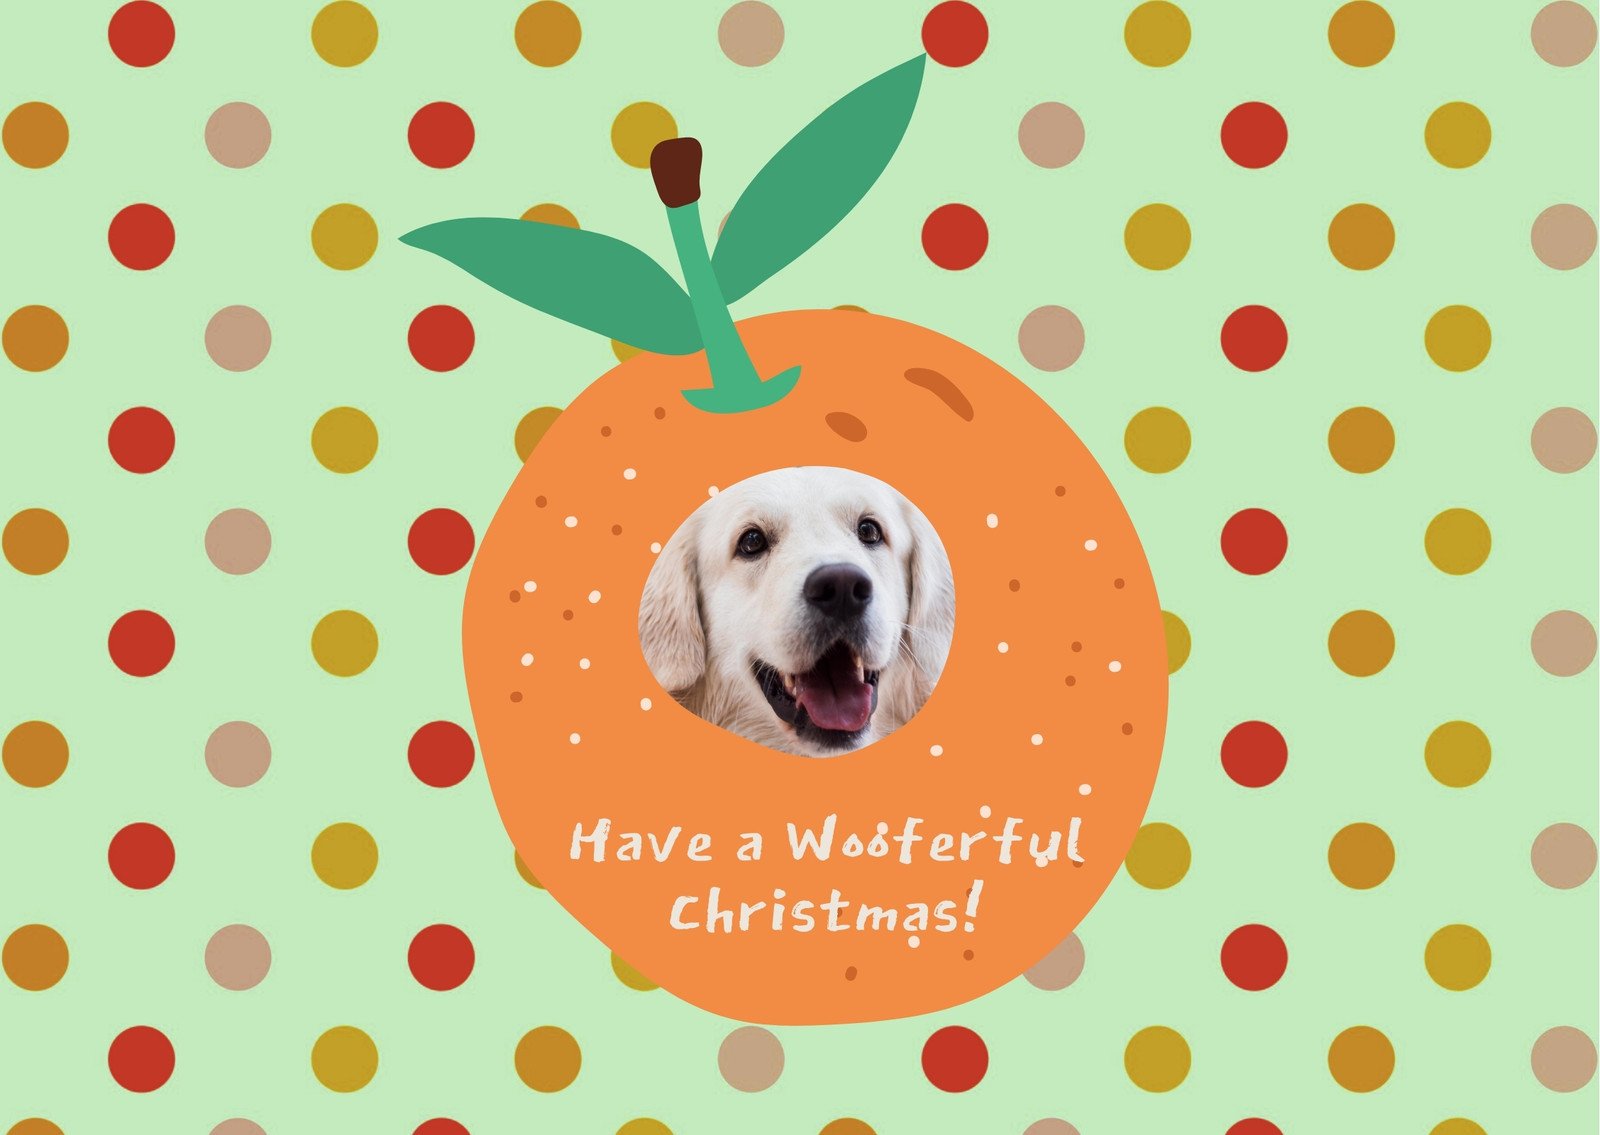 Green Funny Dog in Food Wooferful Christmas Card